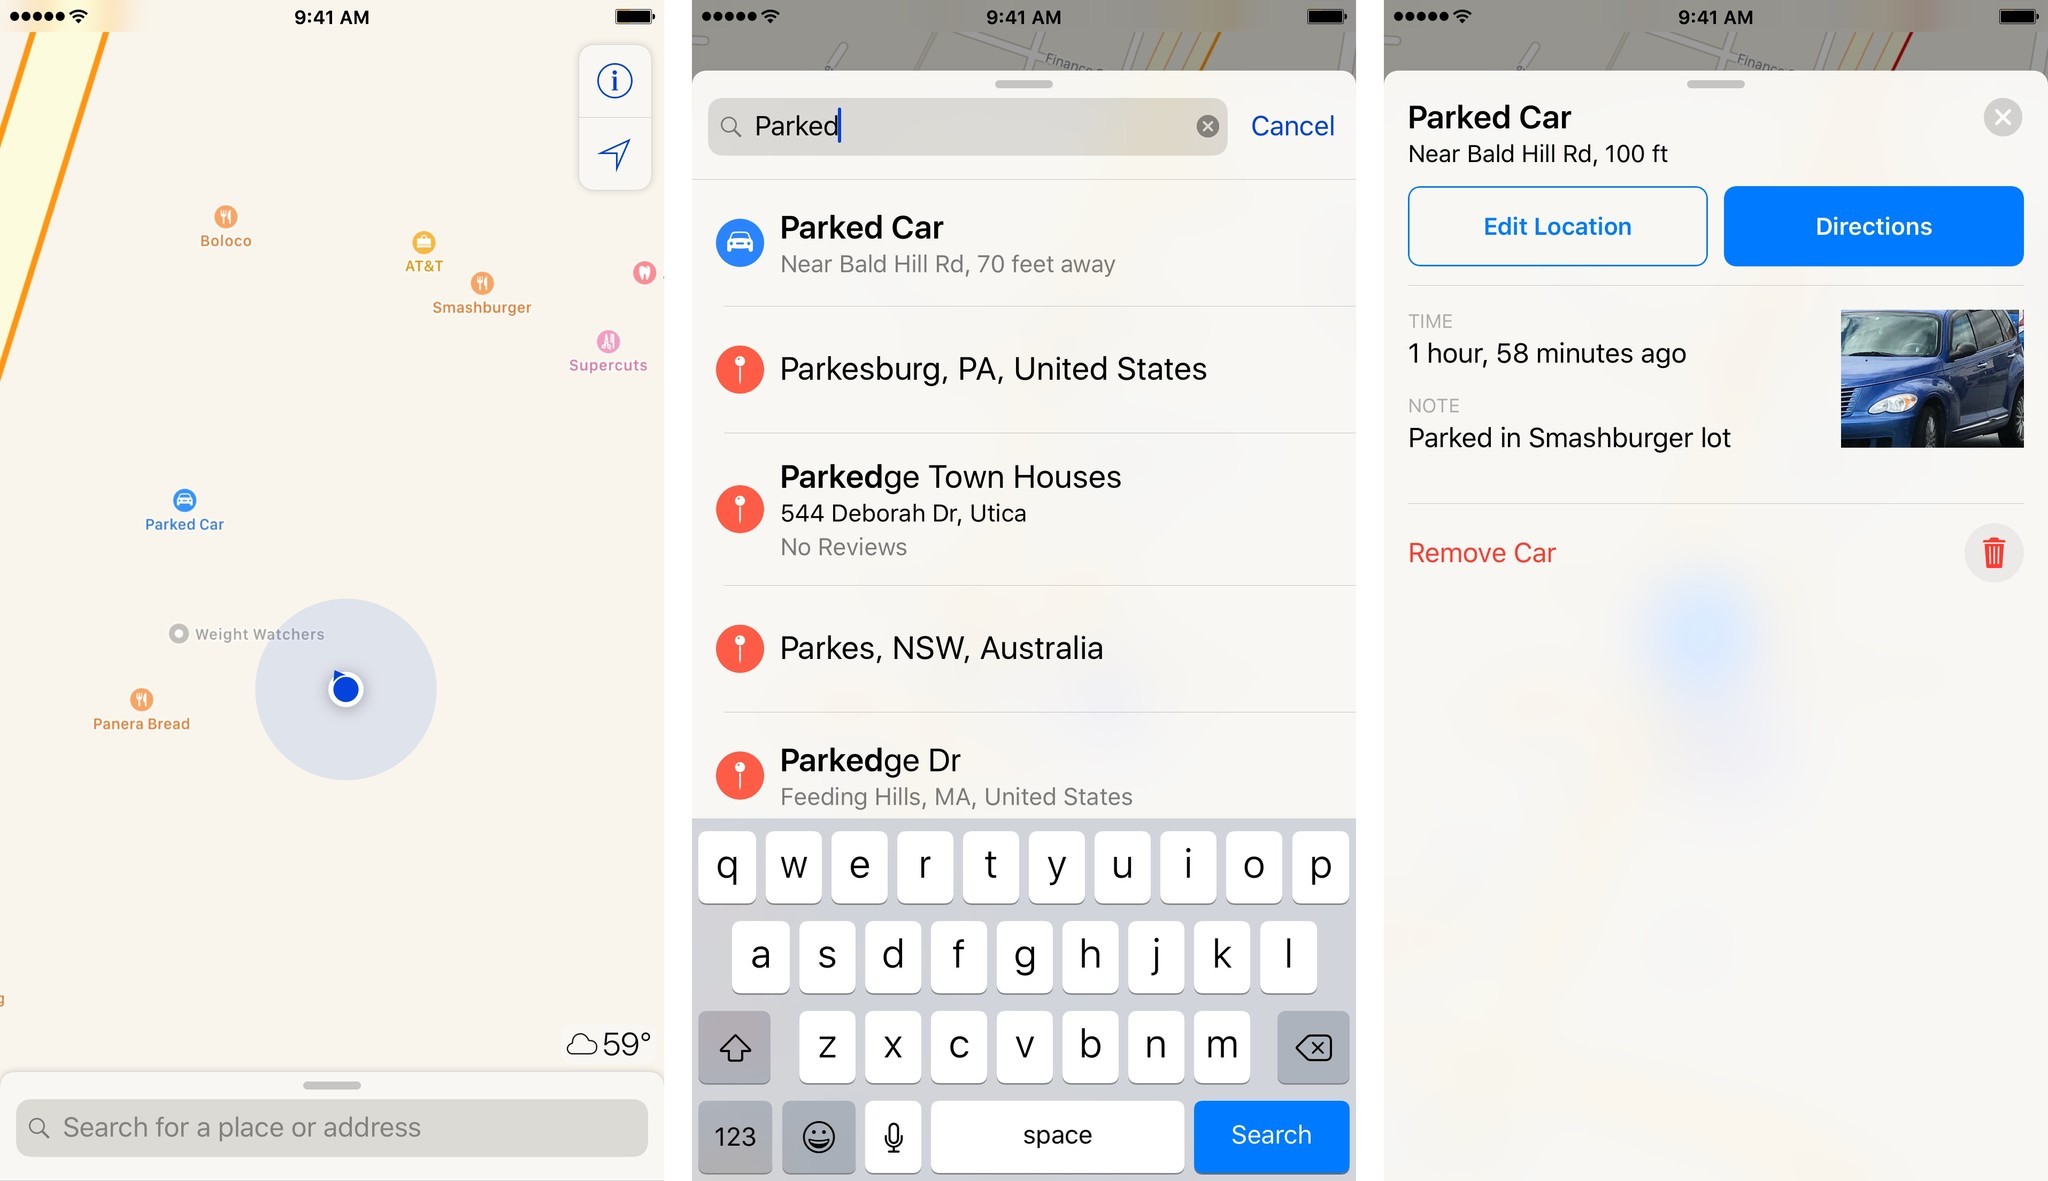 You can tap the Search Bar in the Maps app and type "Parked Car" to find your car. 